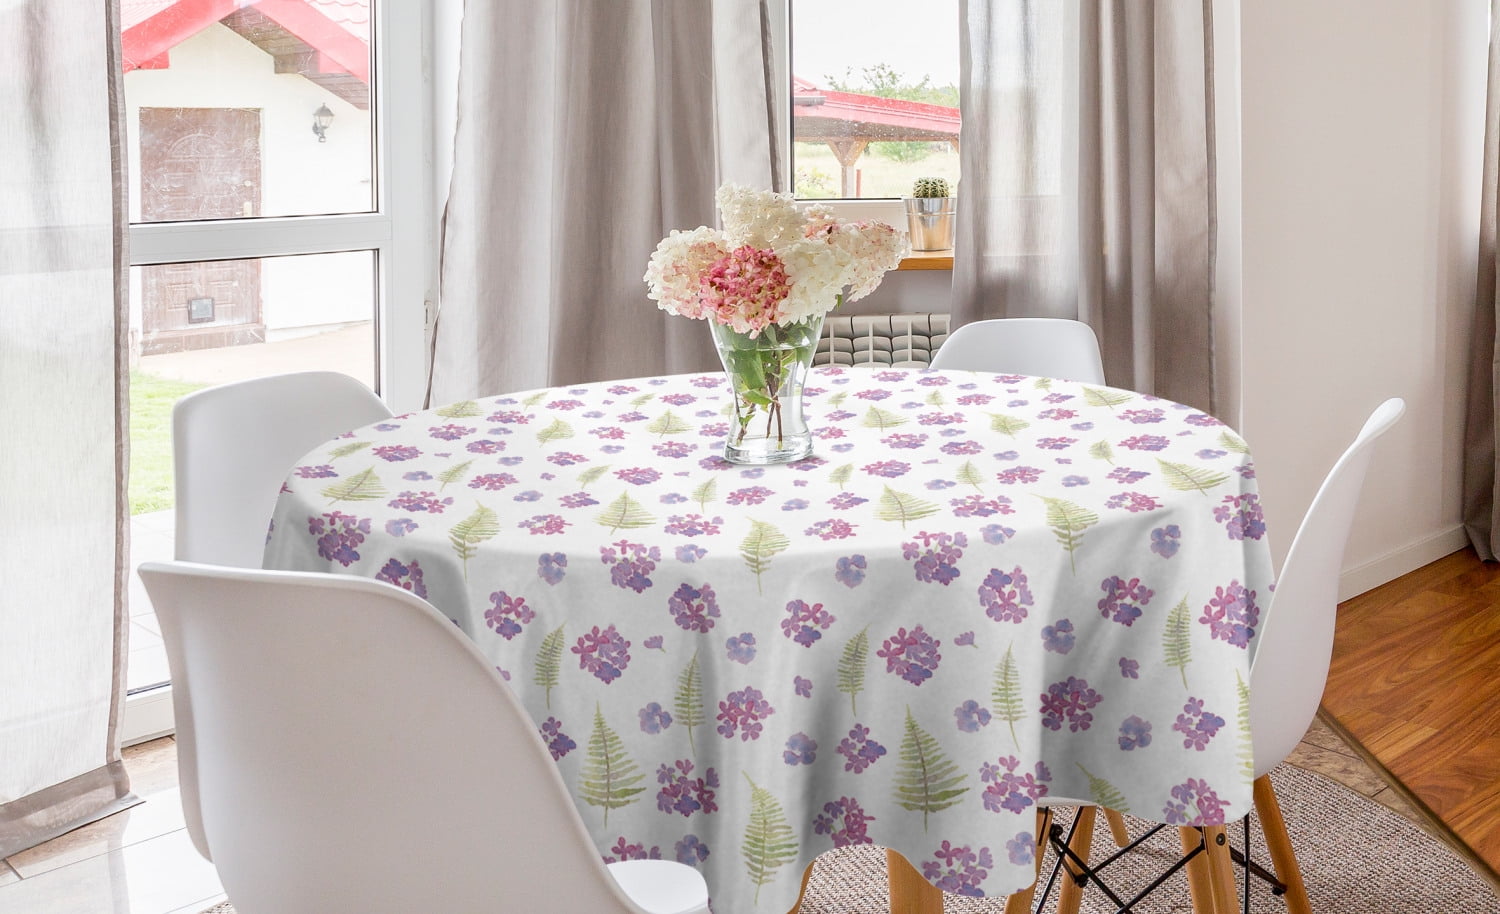 Rectangular Table Cover for Dining Room Kitchen Decor Ambesonne Pastel Tablecloth Coral White Spring Flower Bouquets and Fragrance Buds Petals Cartoon Repetitive Look Pattern 60 X 90 